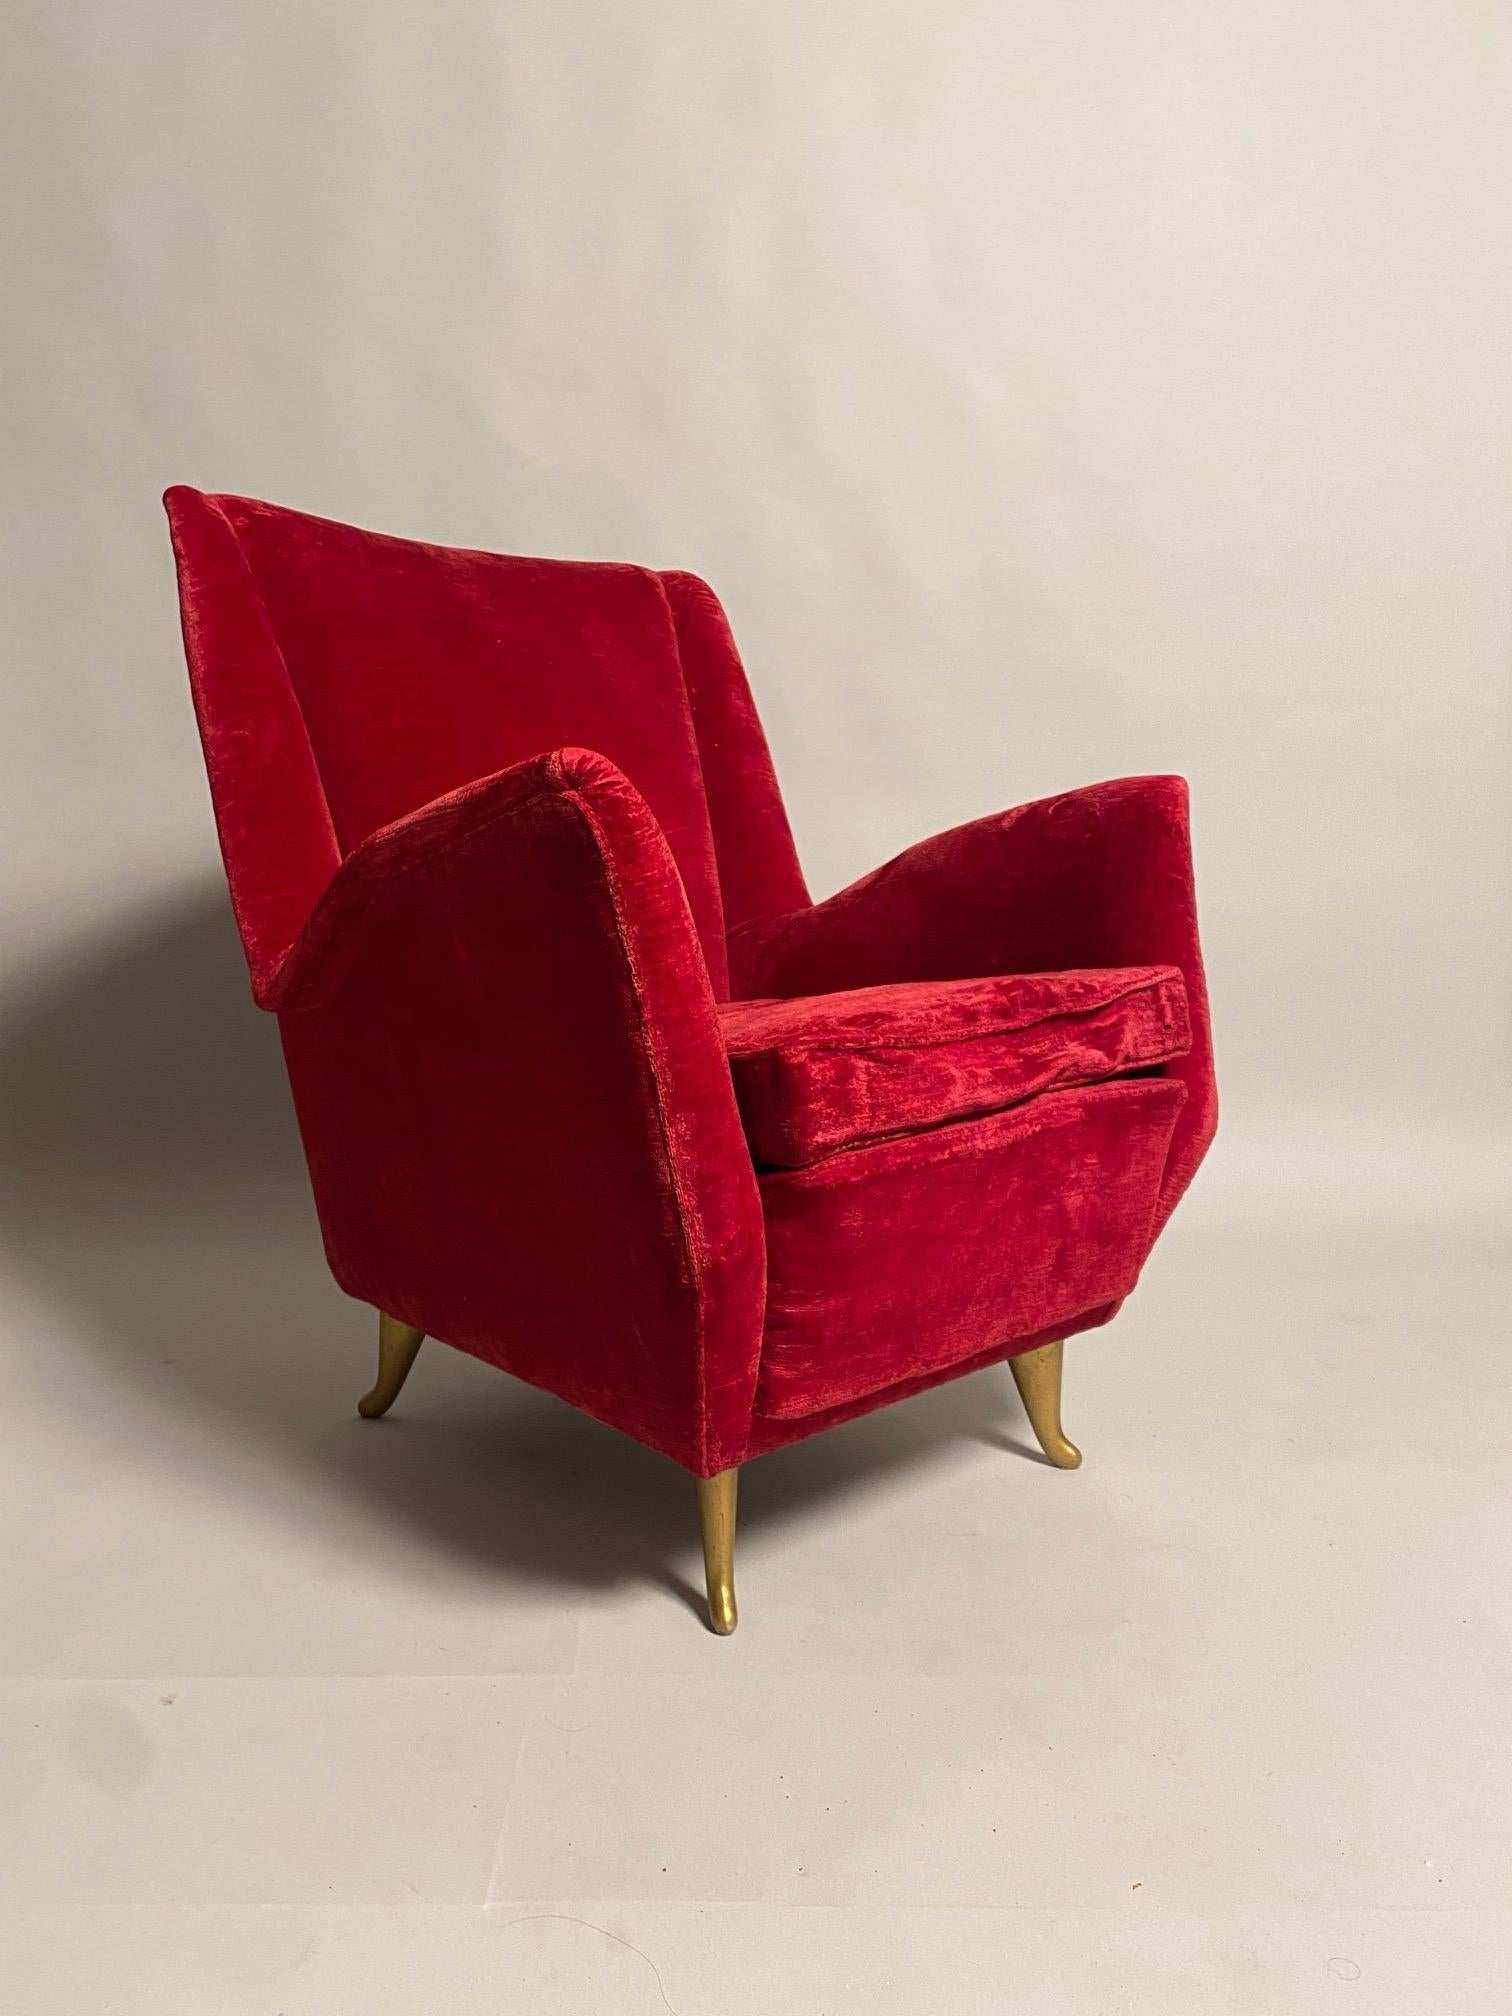 Gio Ponti (Attr.), Set of two red colored wingback chairs, design and manufacturer I. S. A. Bergamo, Italy, 1950s.  The armchairs impose themselves in the space for their elegance and refinement, and while immediately recalling the golden age of